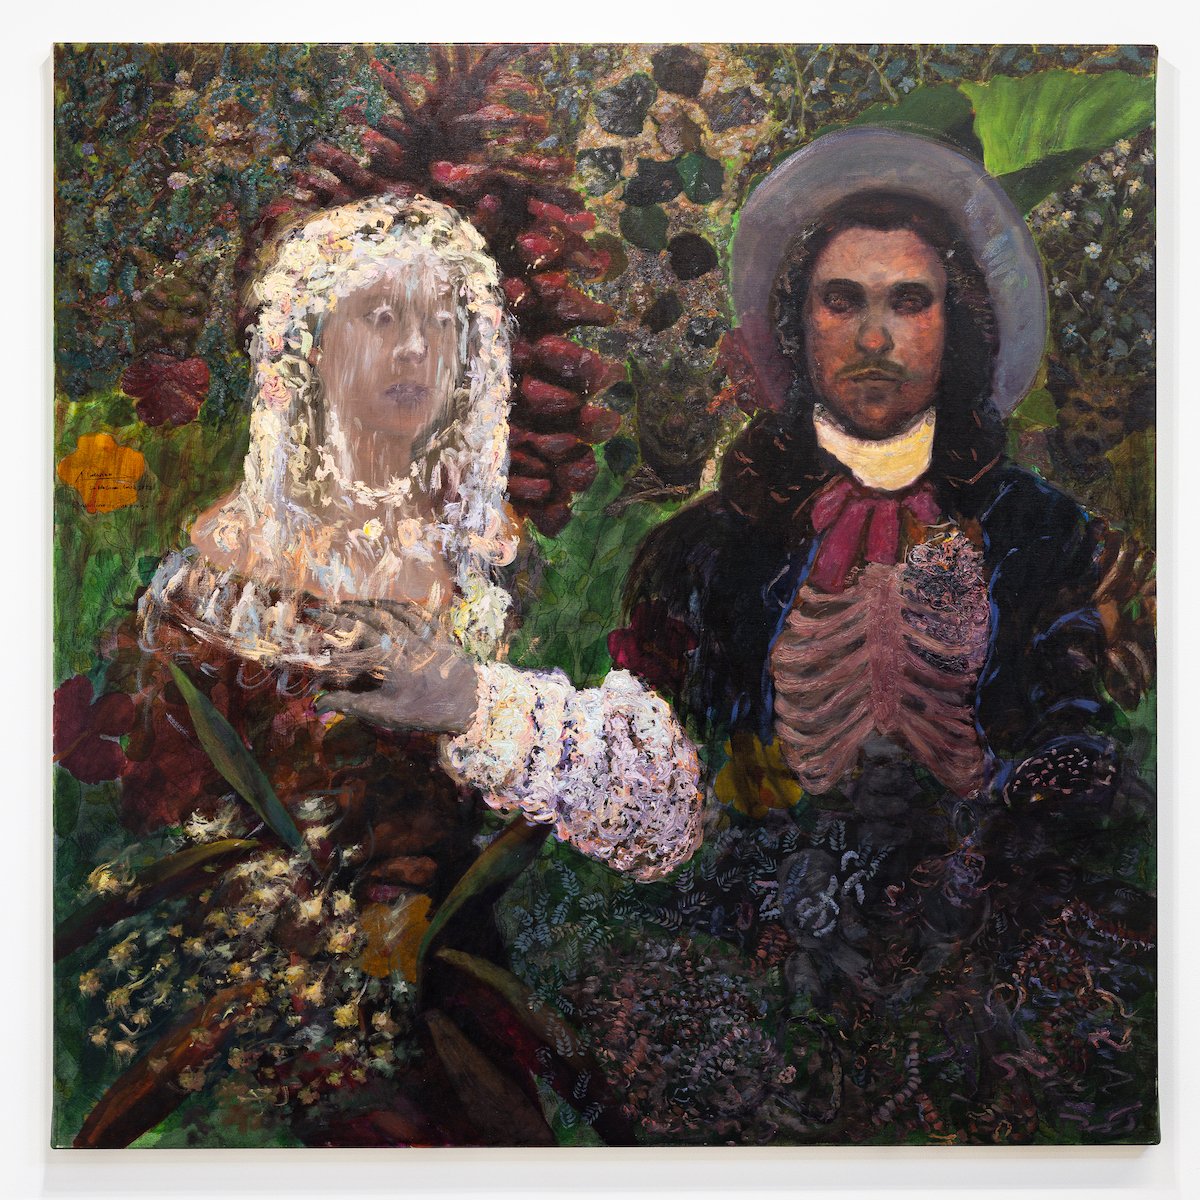 "The Martyrdom of a Friend" Original Oil Painting of a Couple in Lush Green Foliage by Orlando Almanza @ Soapbox Arts Gallery, Burlington, Vermont